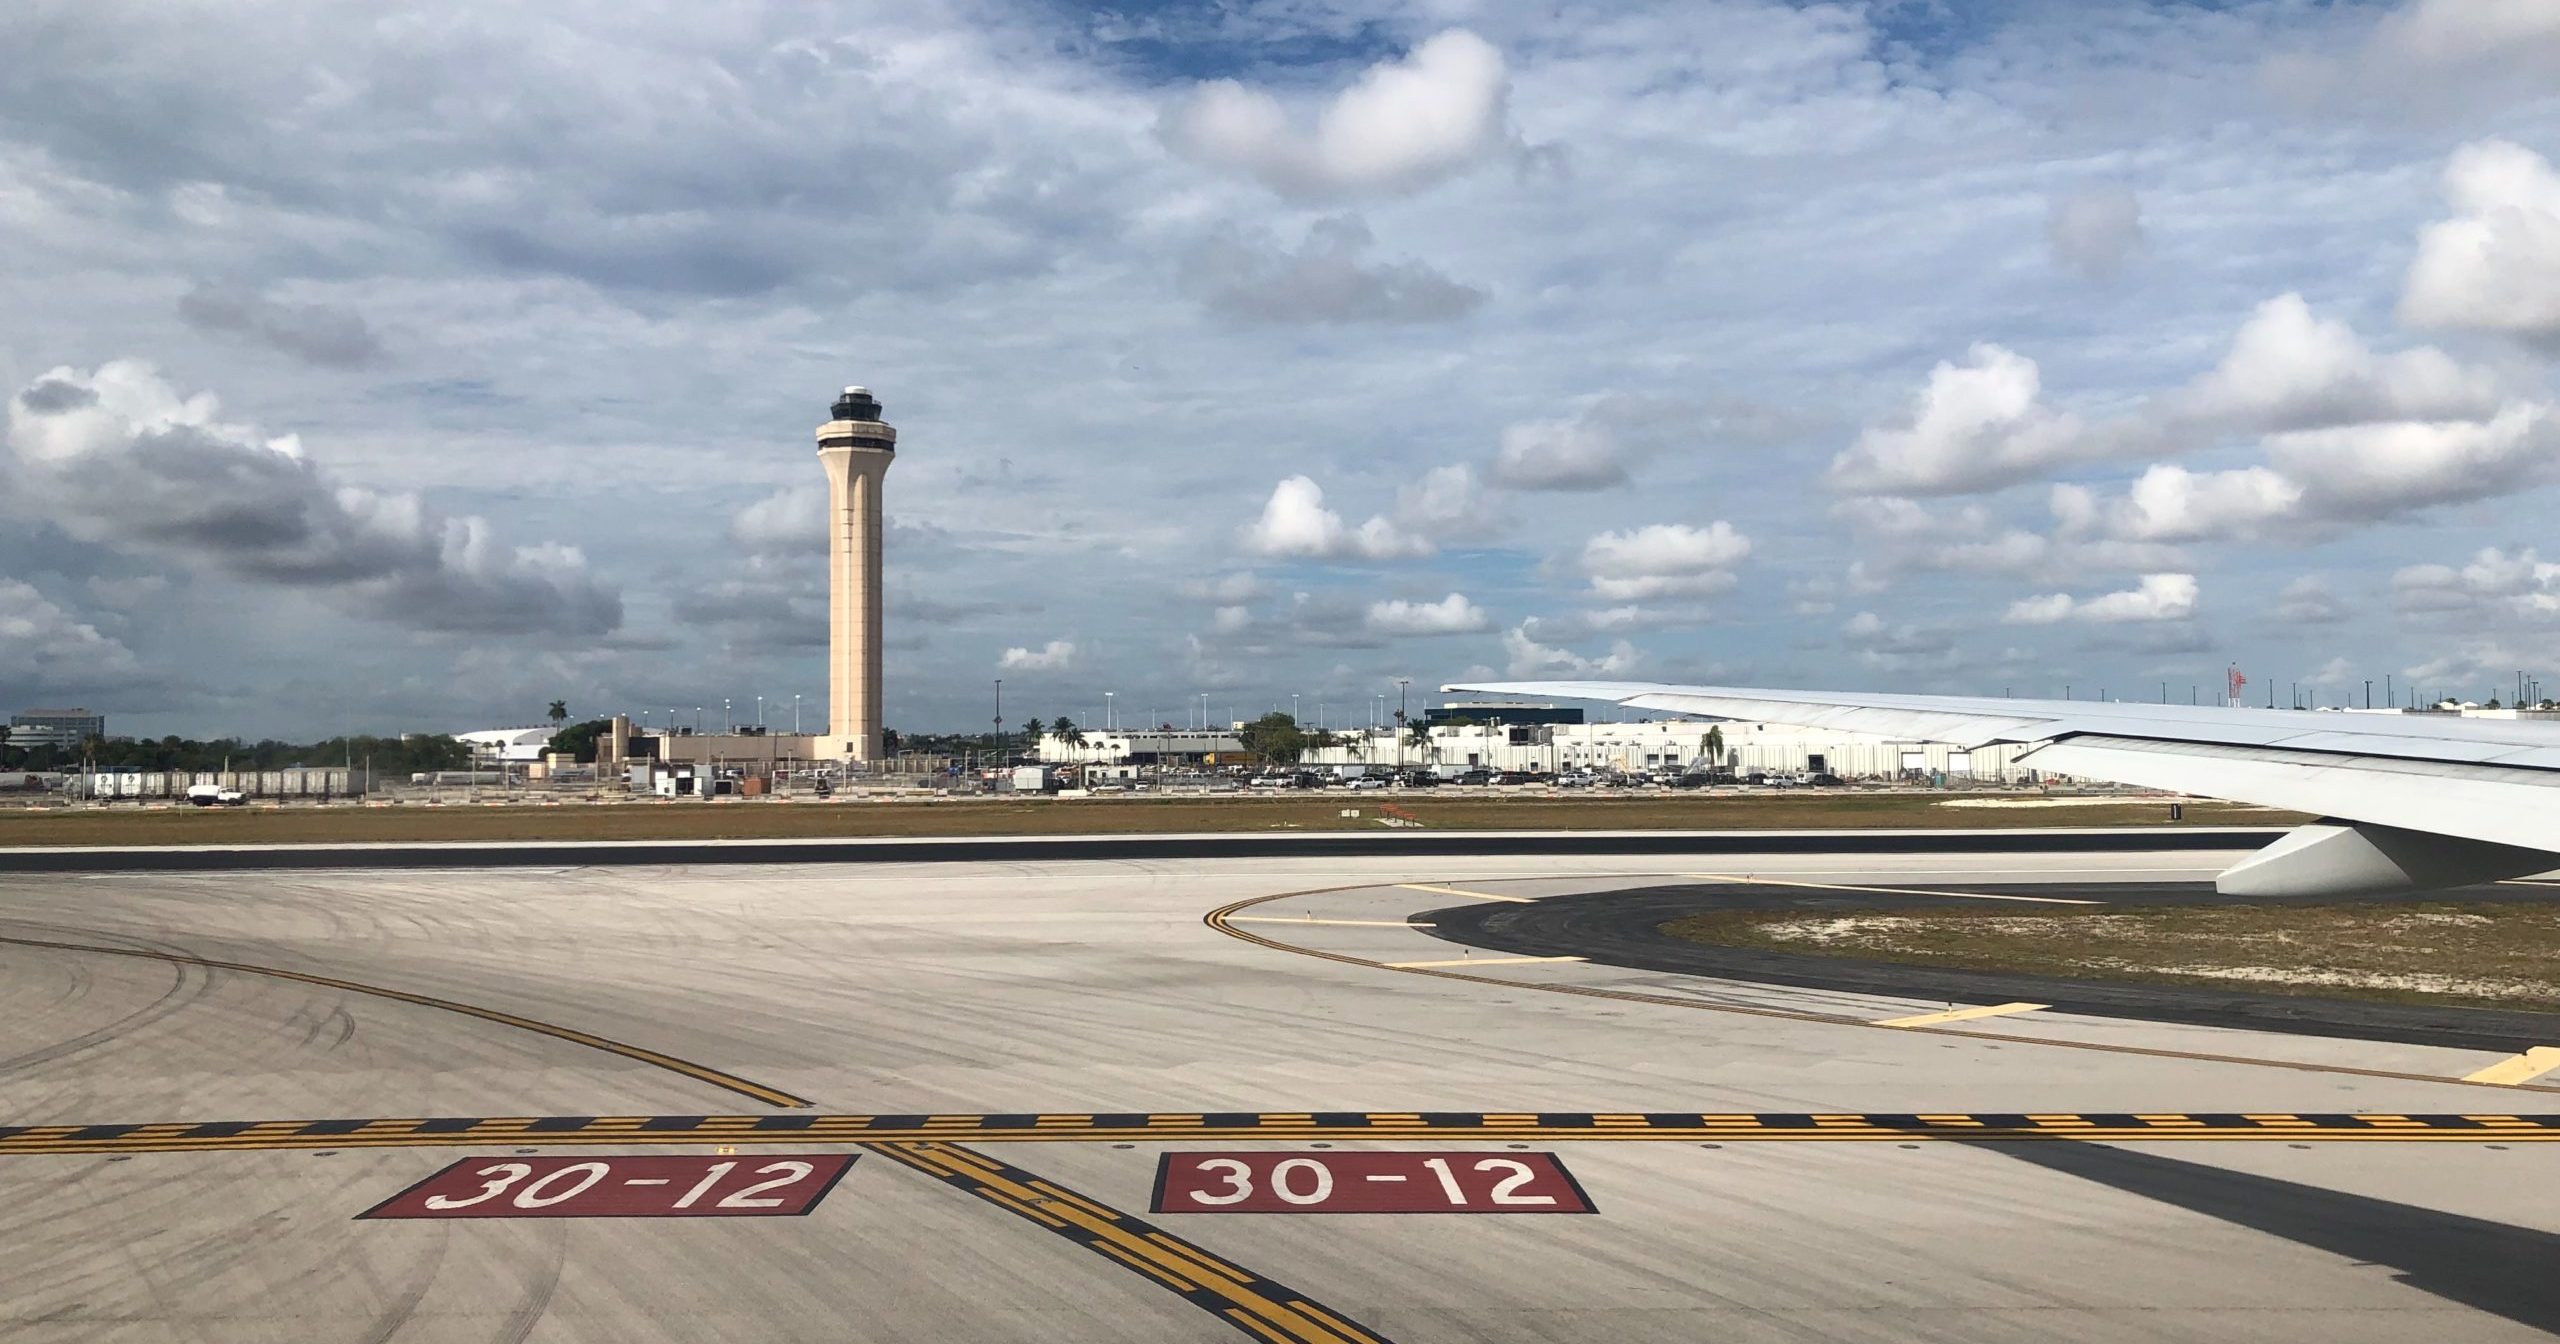 airport runway with tower in background and puffy white clouds in sky